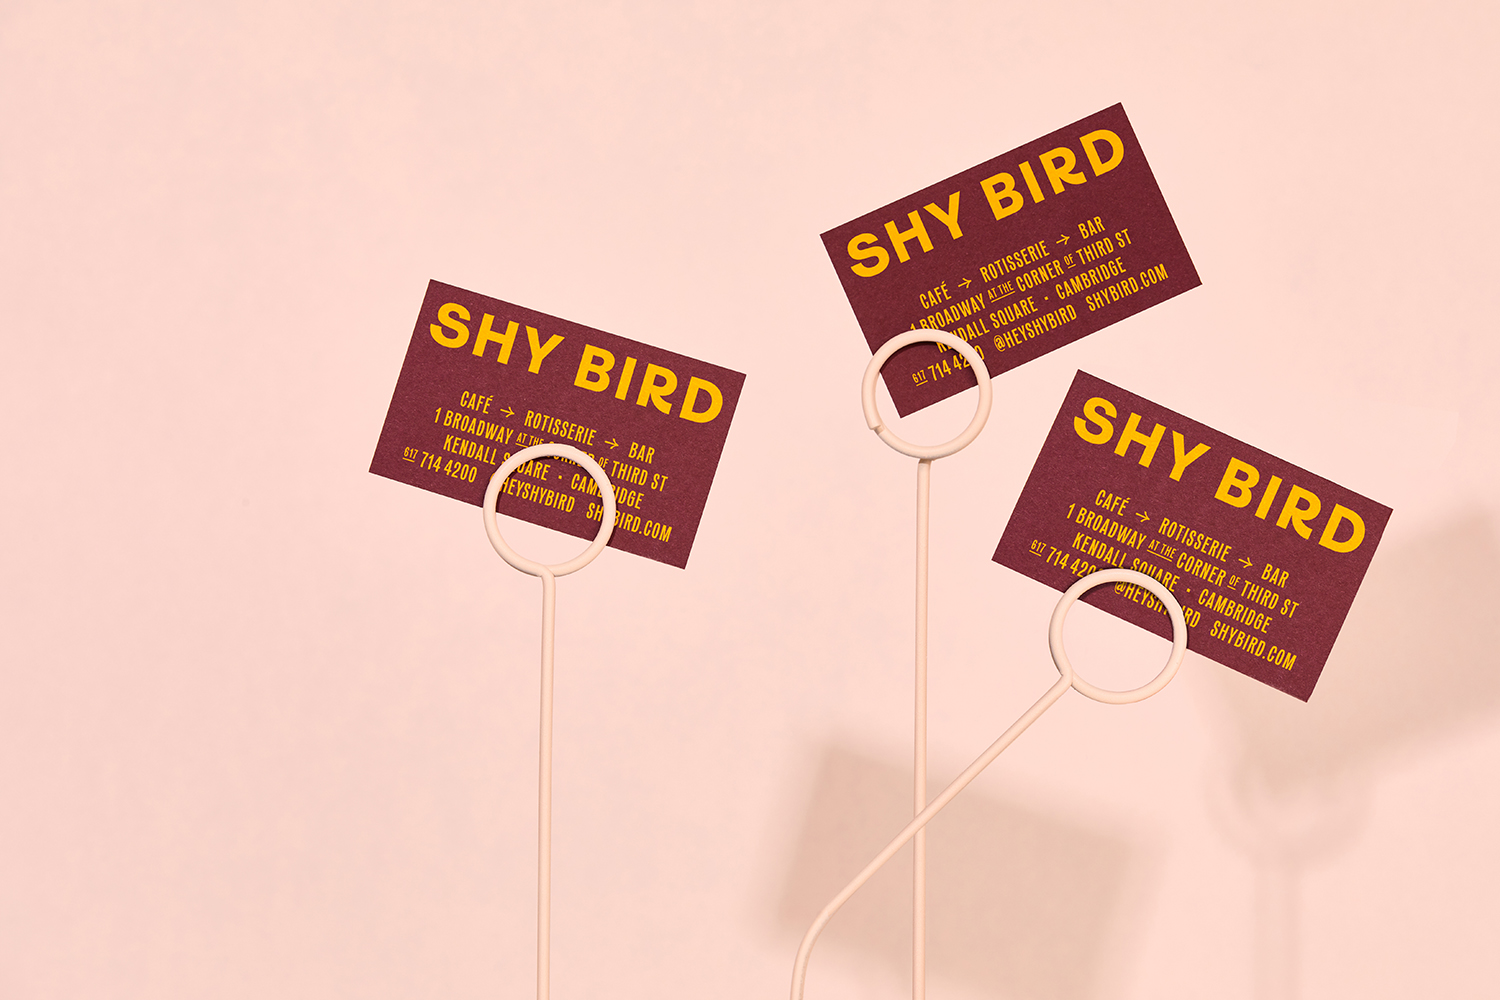 Logo, branding, packaging and signage by Perky Bros for Shy Bird, a café, rotisserie and bar in Cambridge, MA